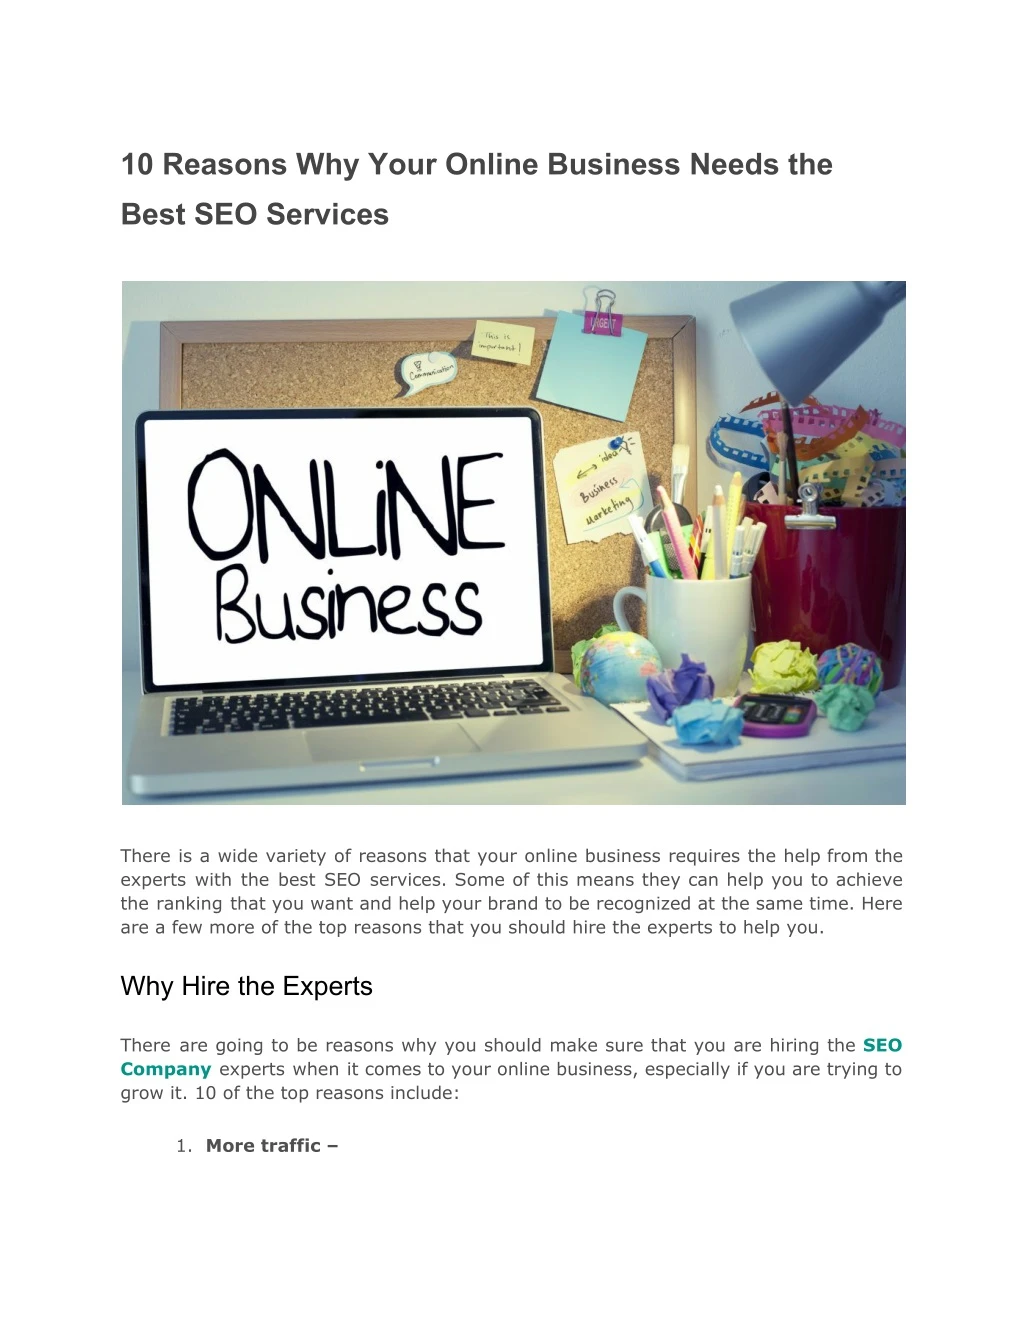 10 reasons why your online business needs the